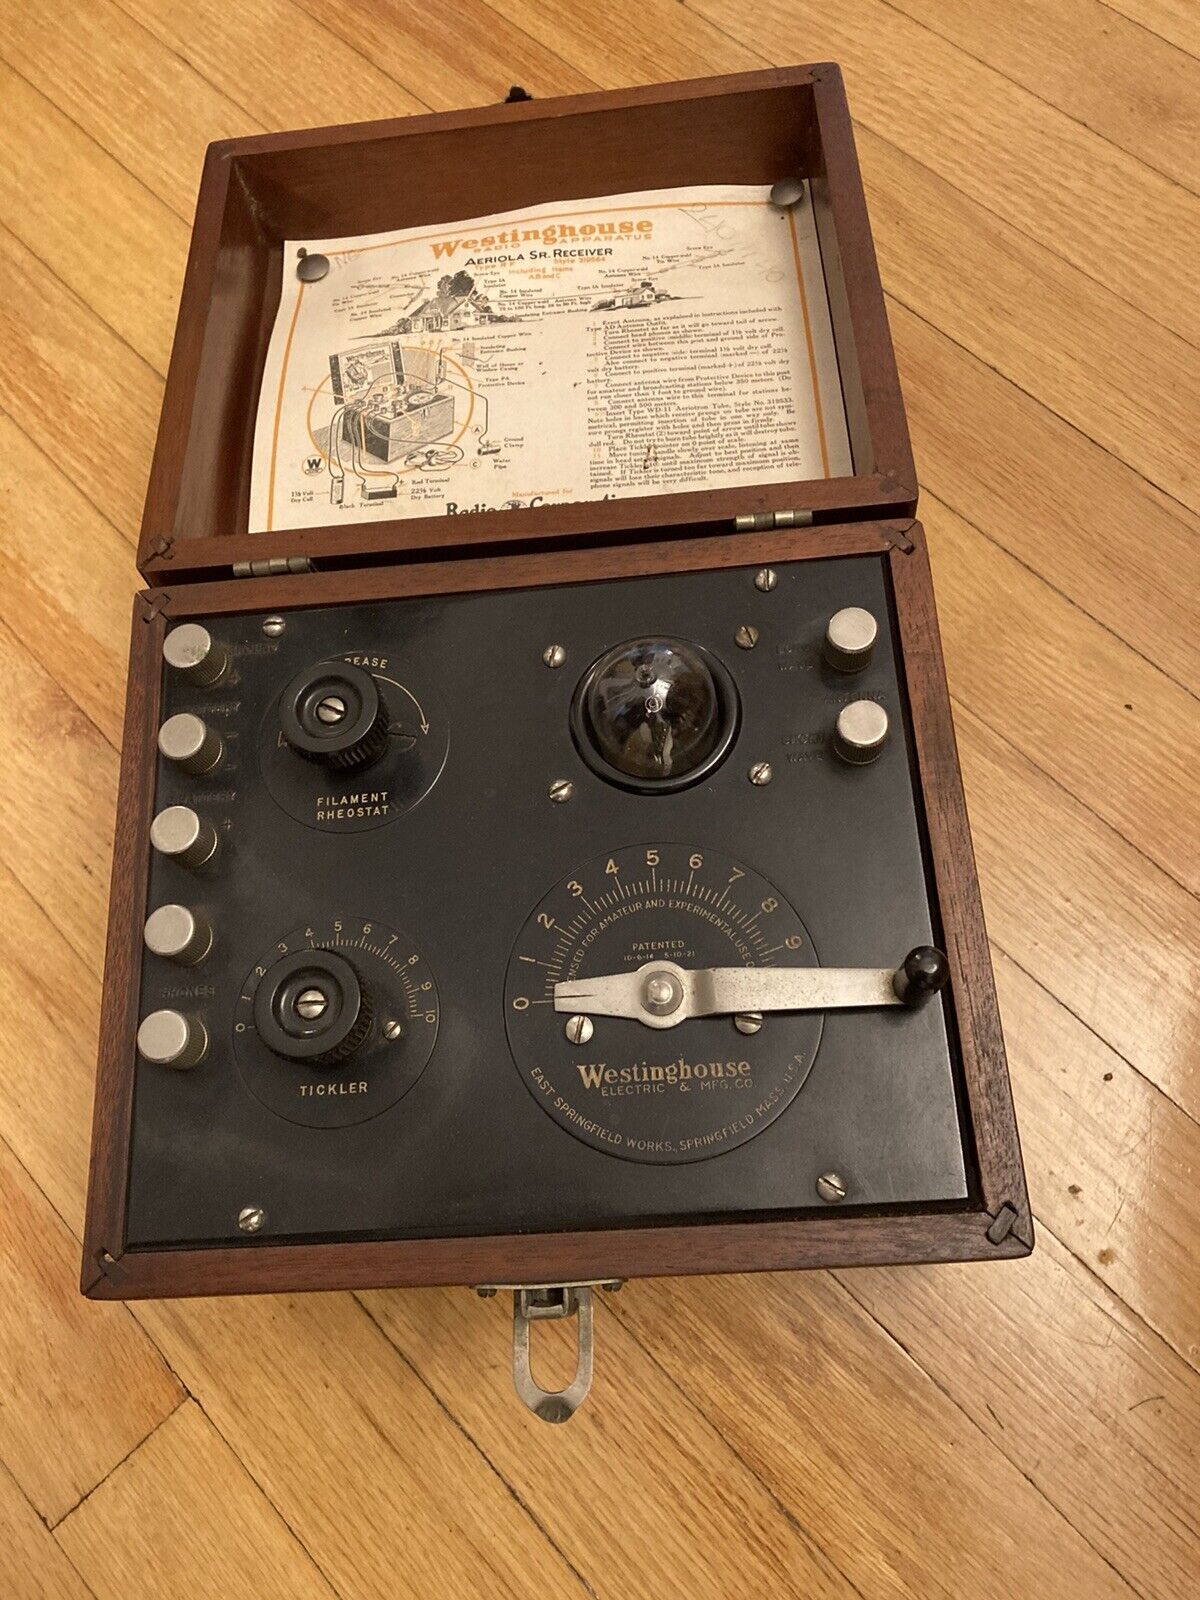 Awesome 1921 Westinghouse RCA  Aeriola Sr Receiver w/ display tube in wood box